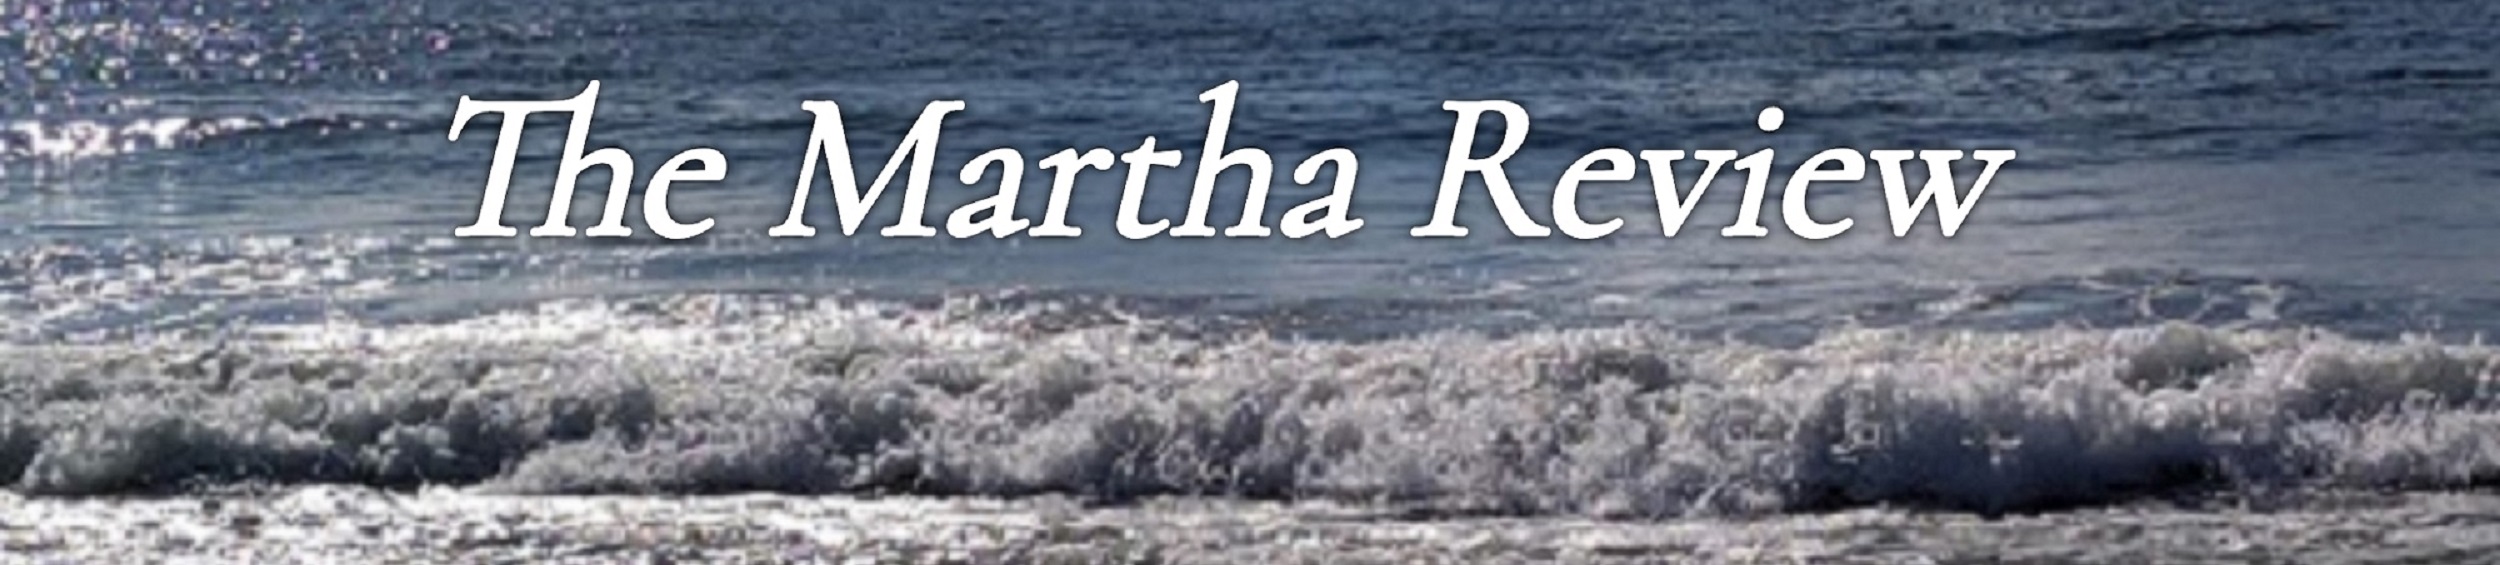 The Martha Review